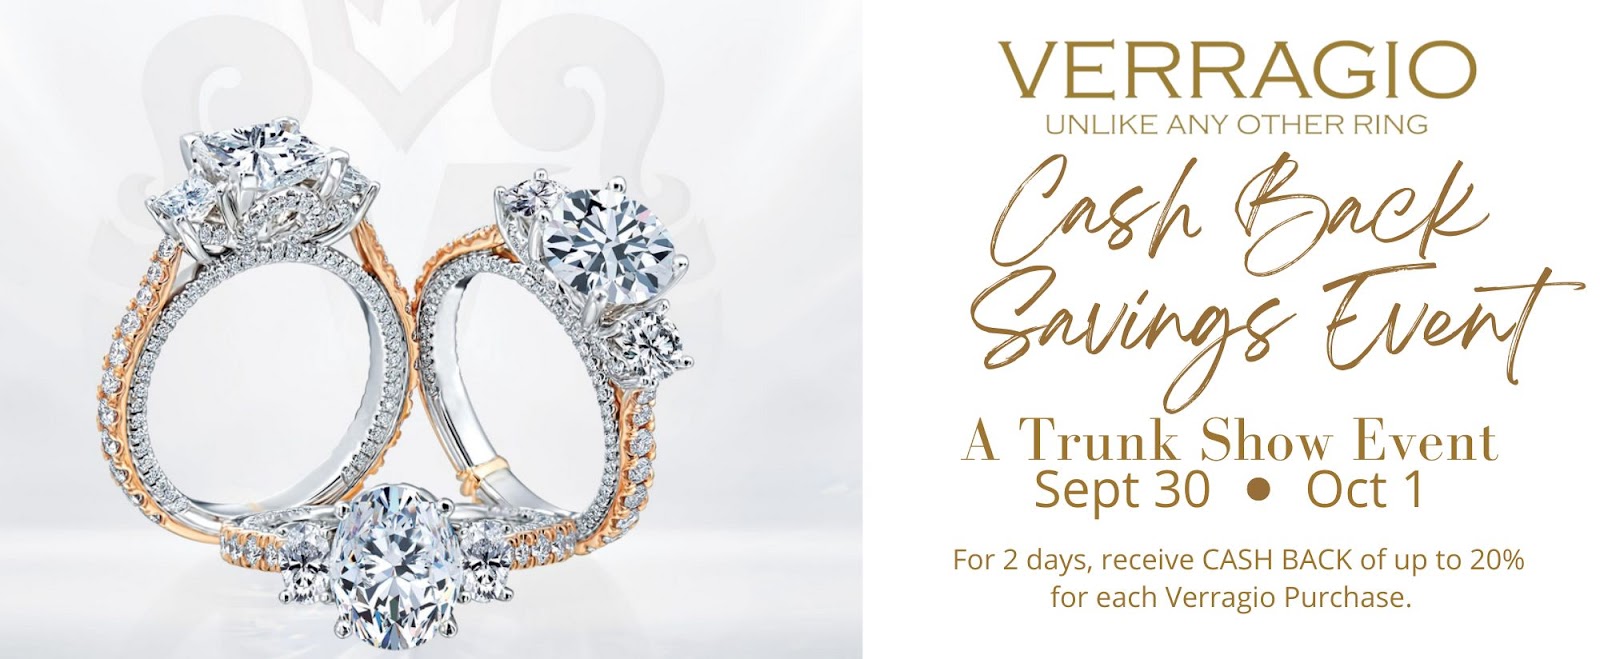 Adlers Jewelers for Breathtaking Verragio Trunk Show